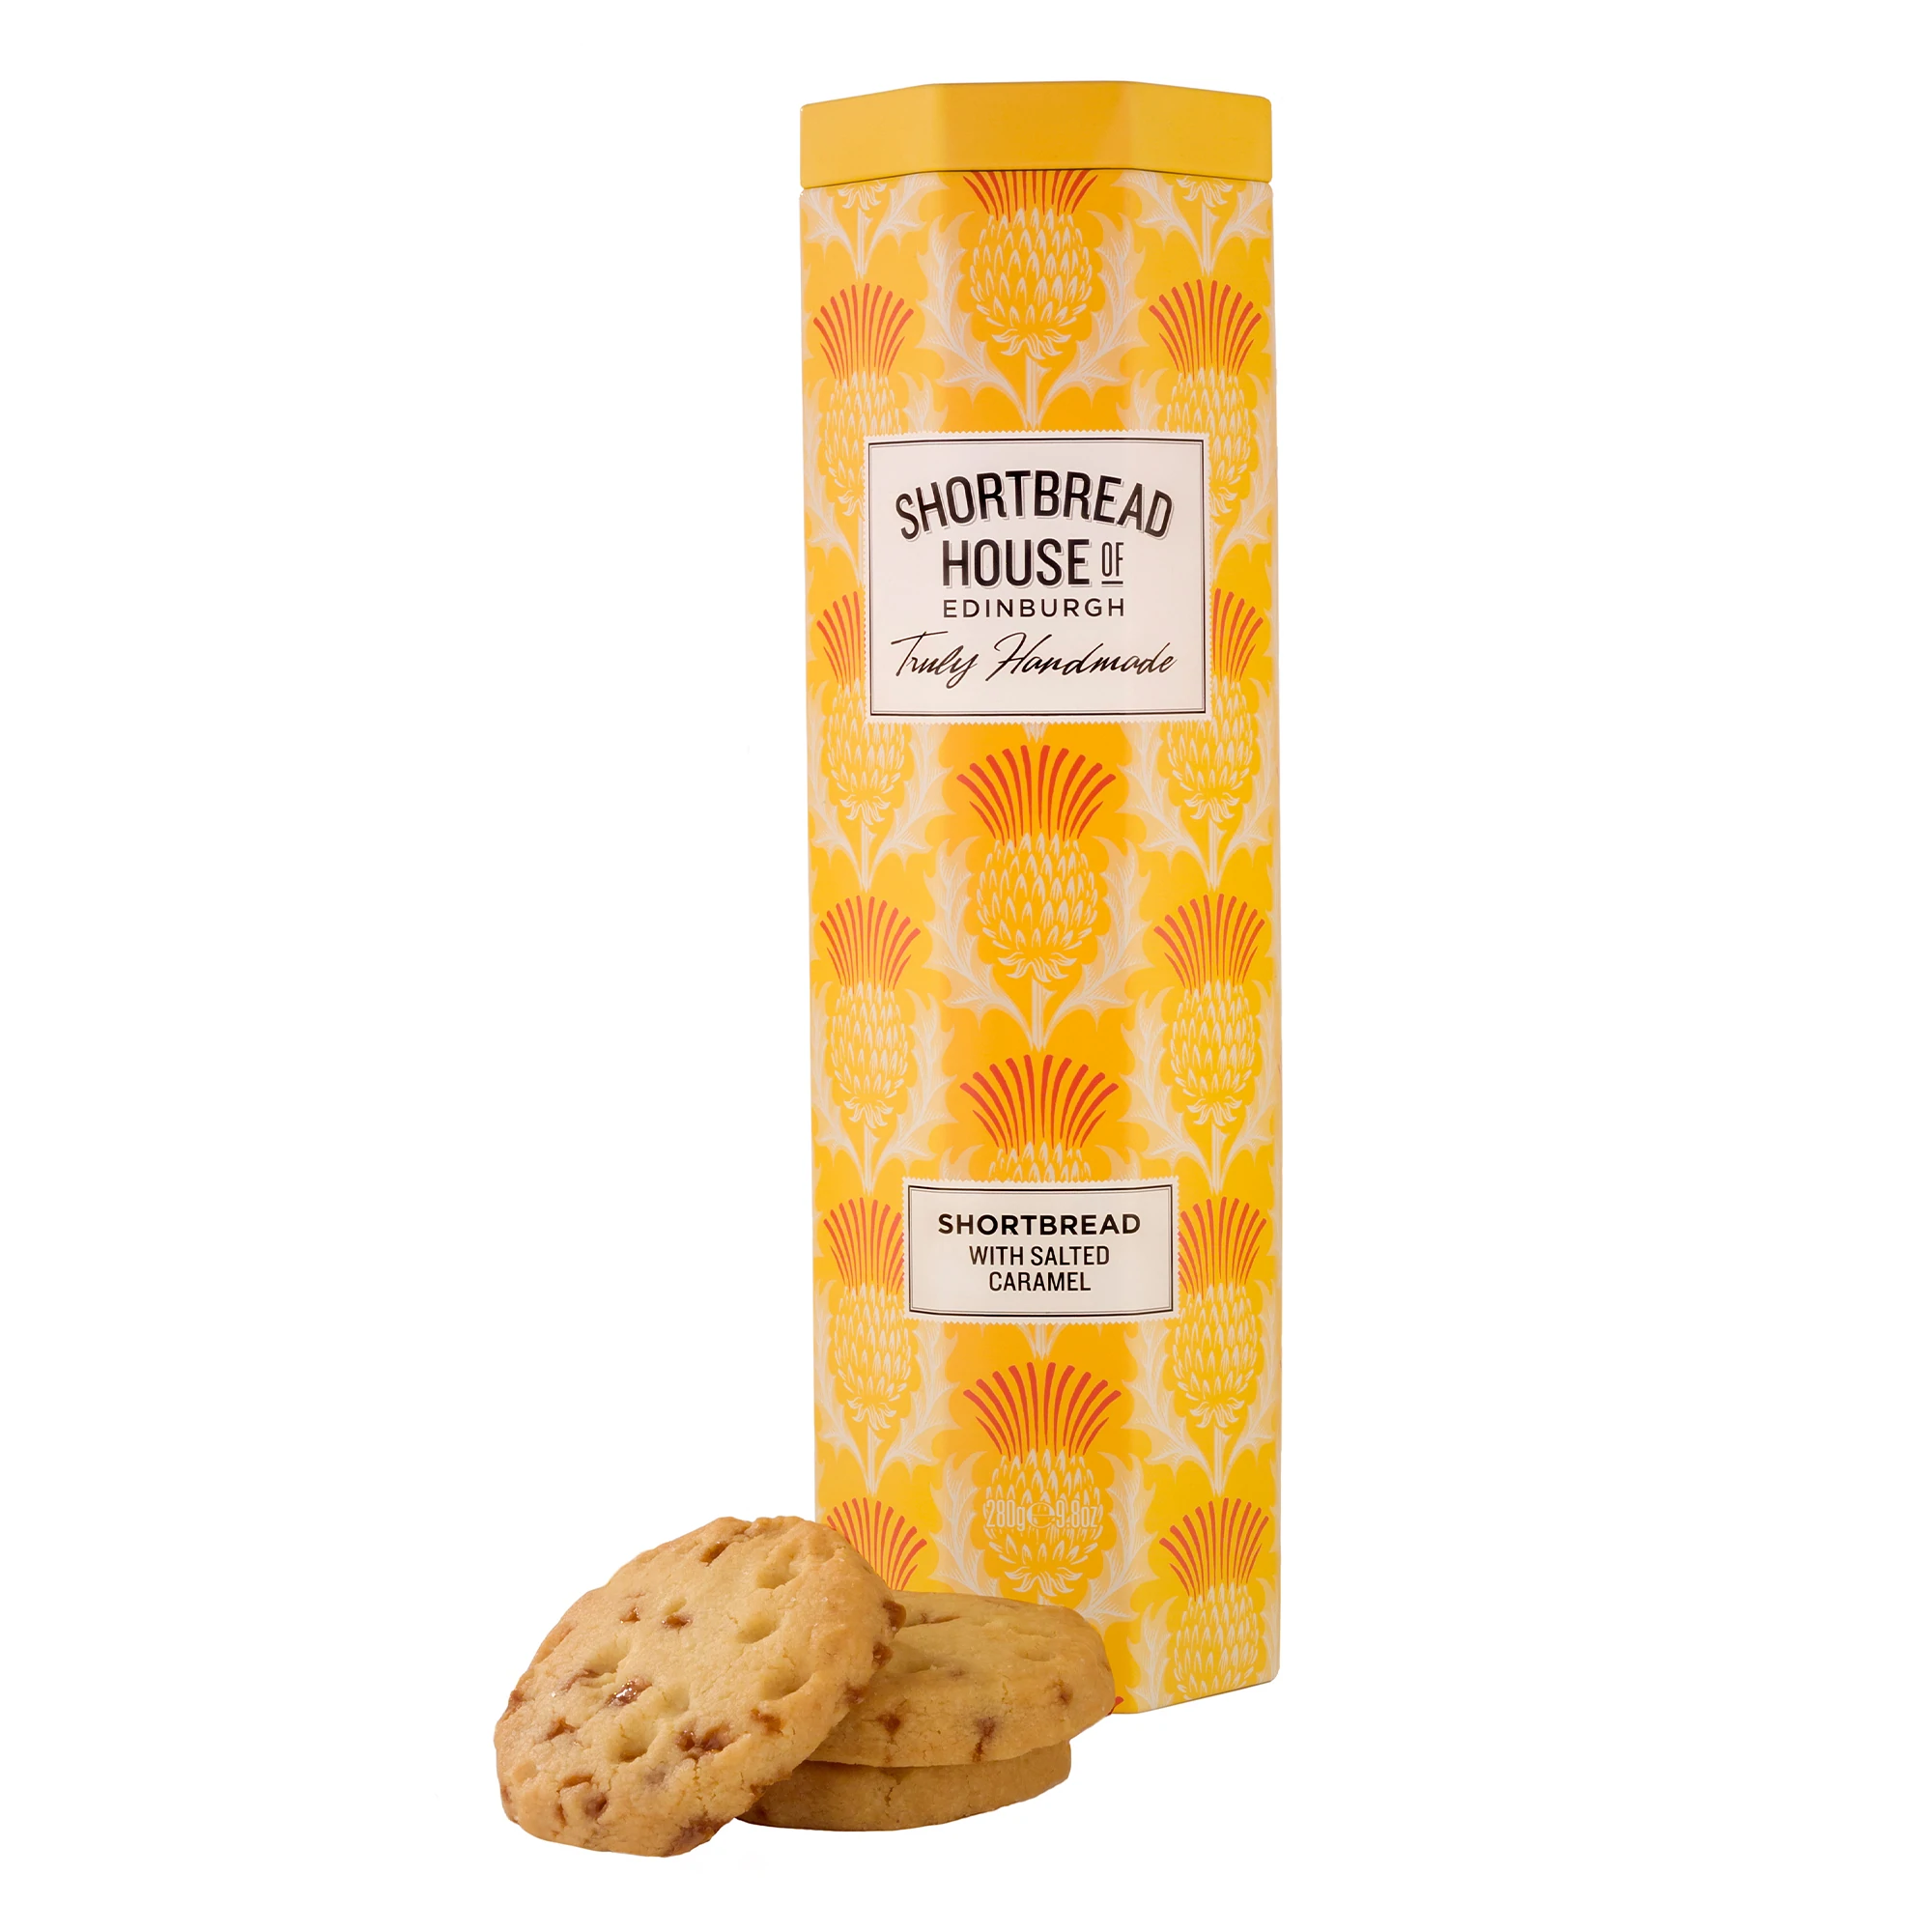 Shortbread House Octagonal Tin of Truly Handmade Shortbread Biscuits with Salted Caramel